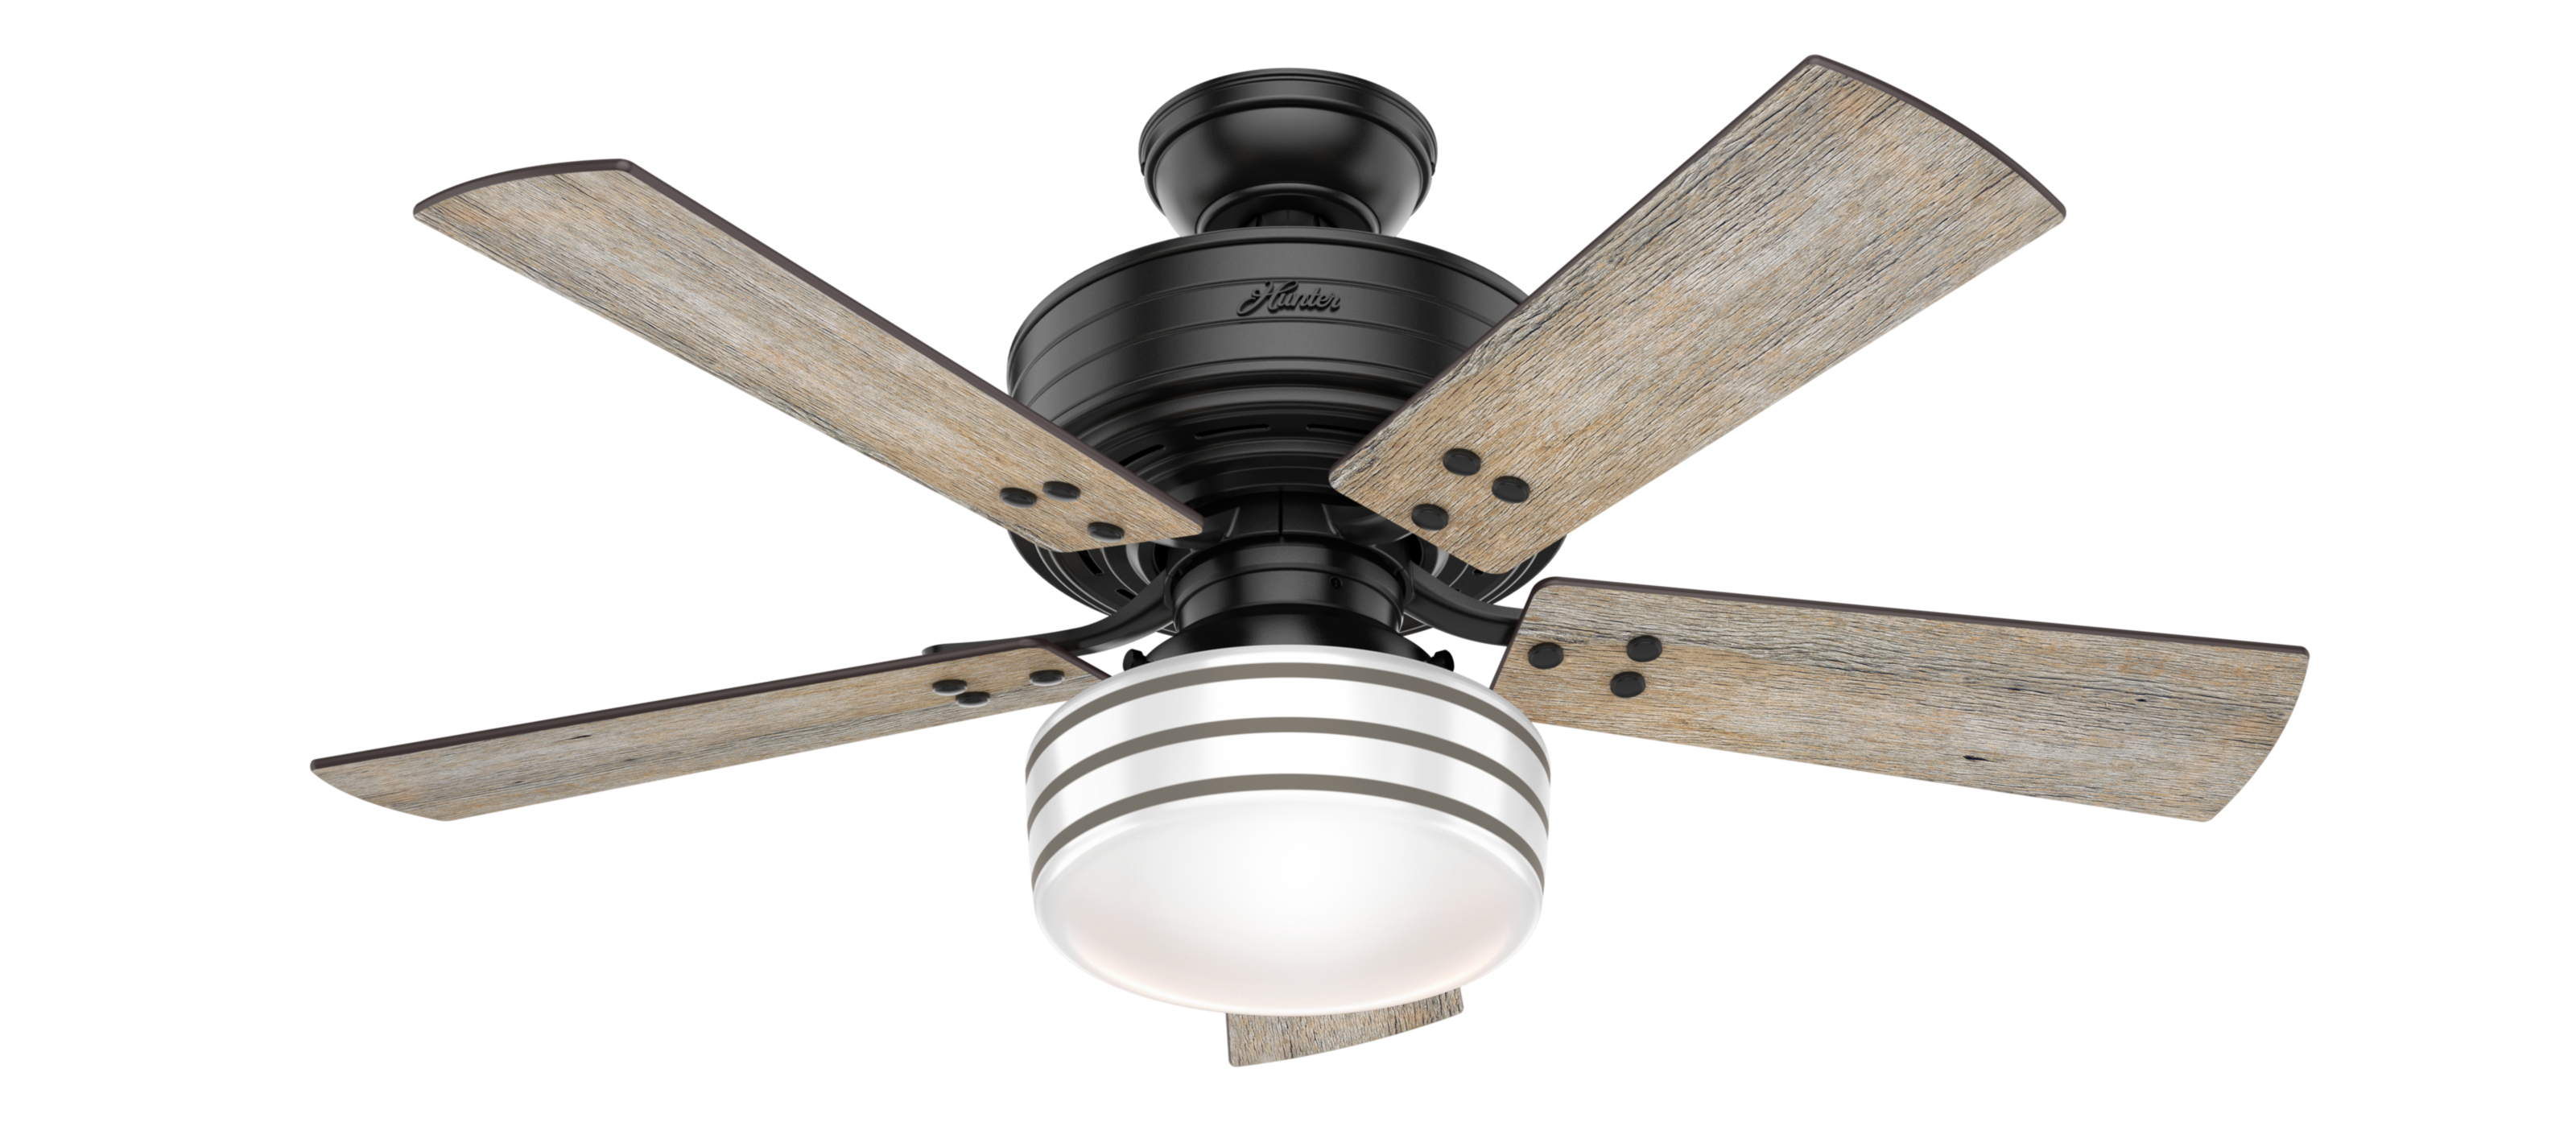 Hunter 44 inch Cedar Key Ceiling Fan with LED Light Kit and Handheld Remote